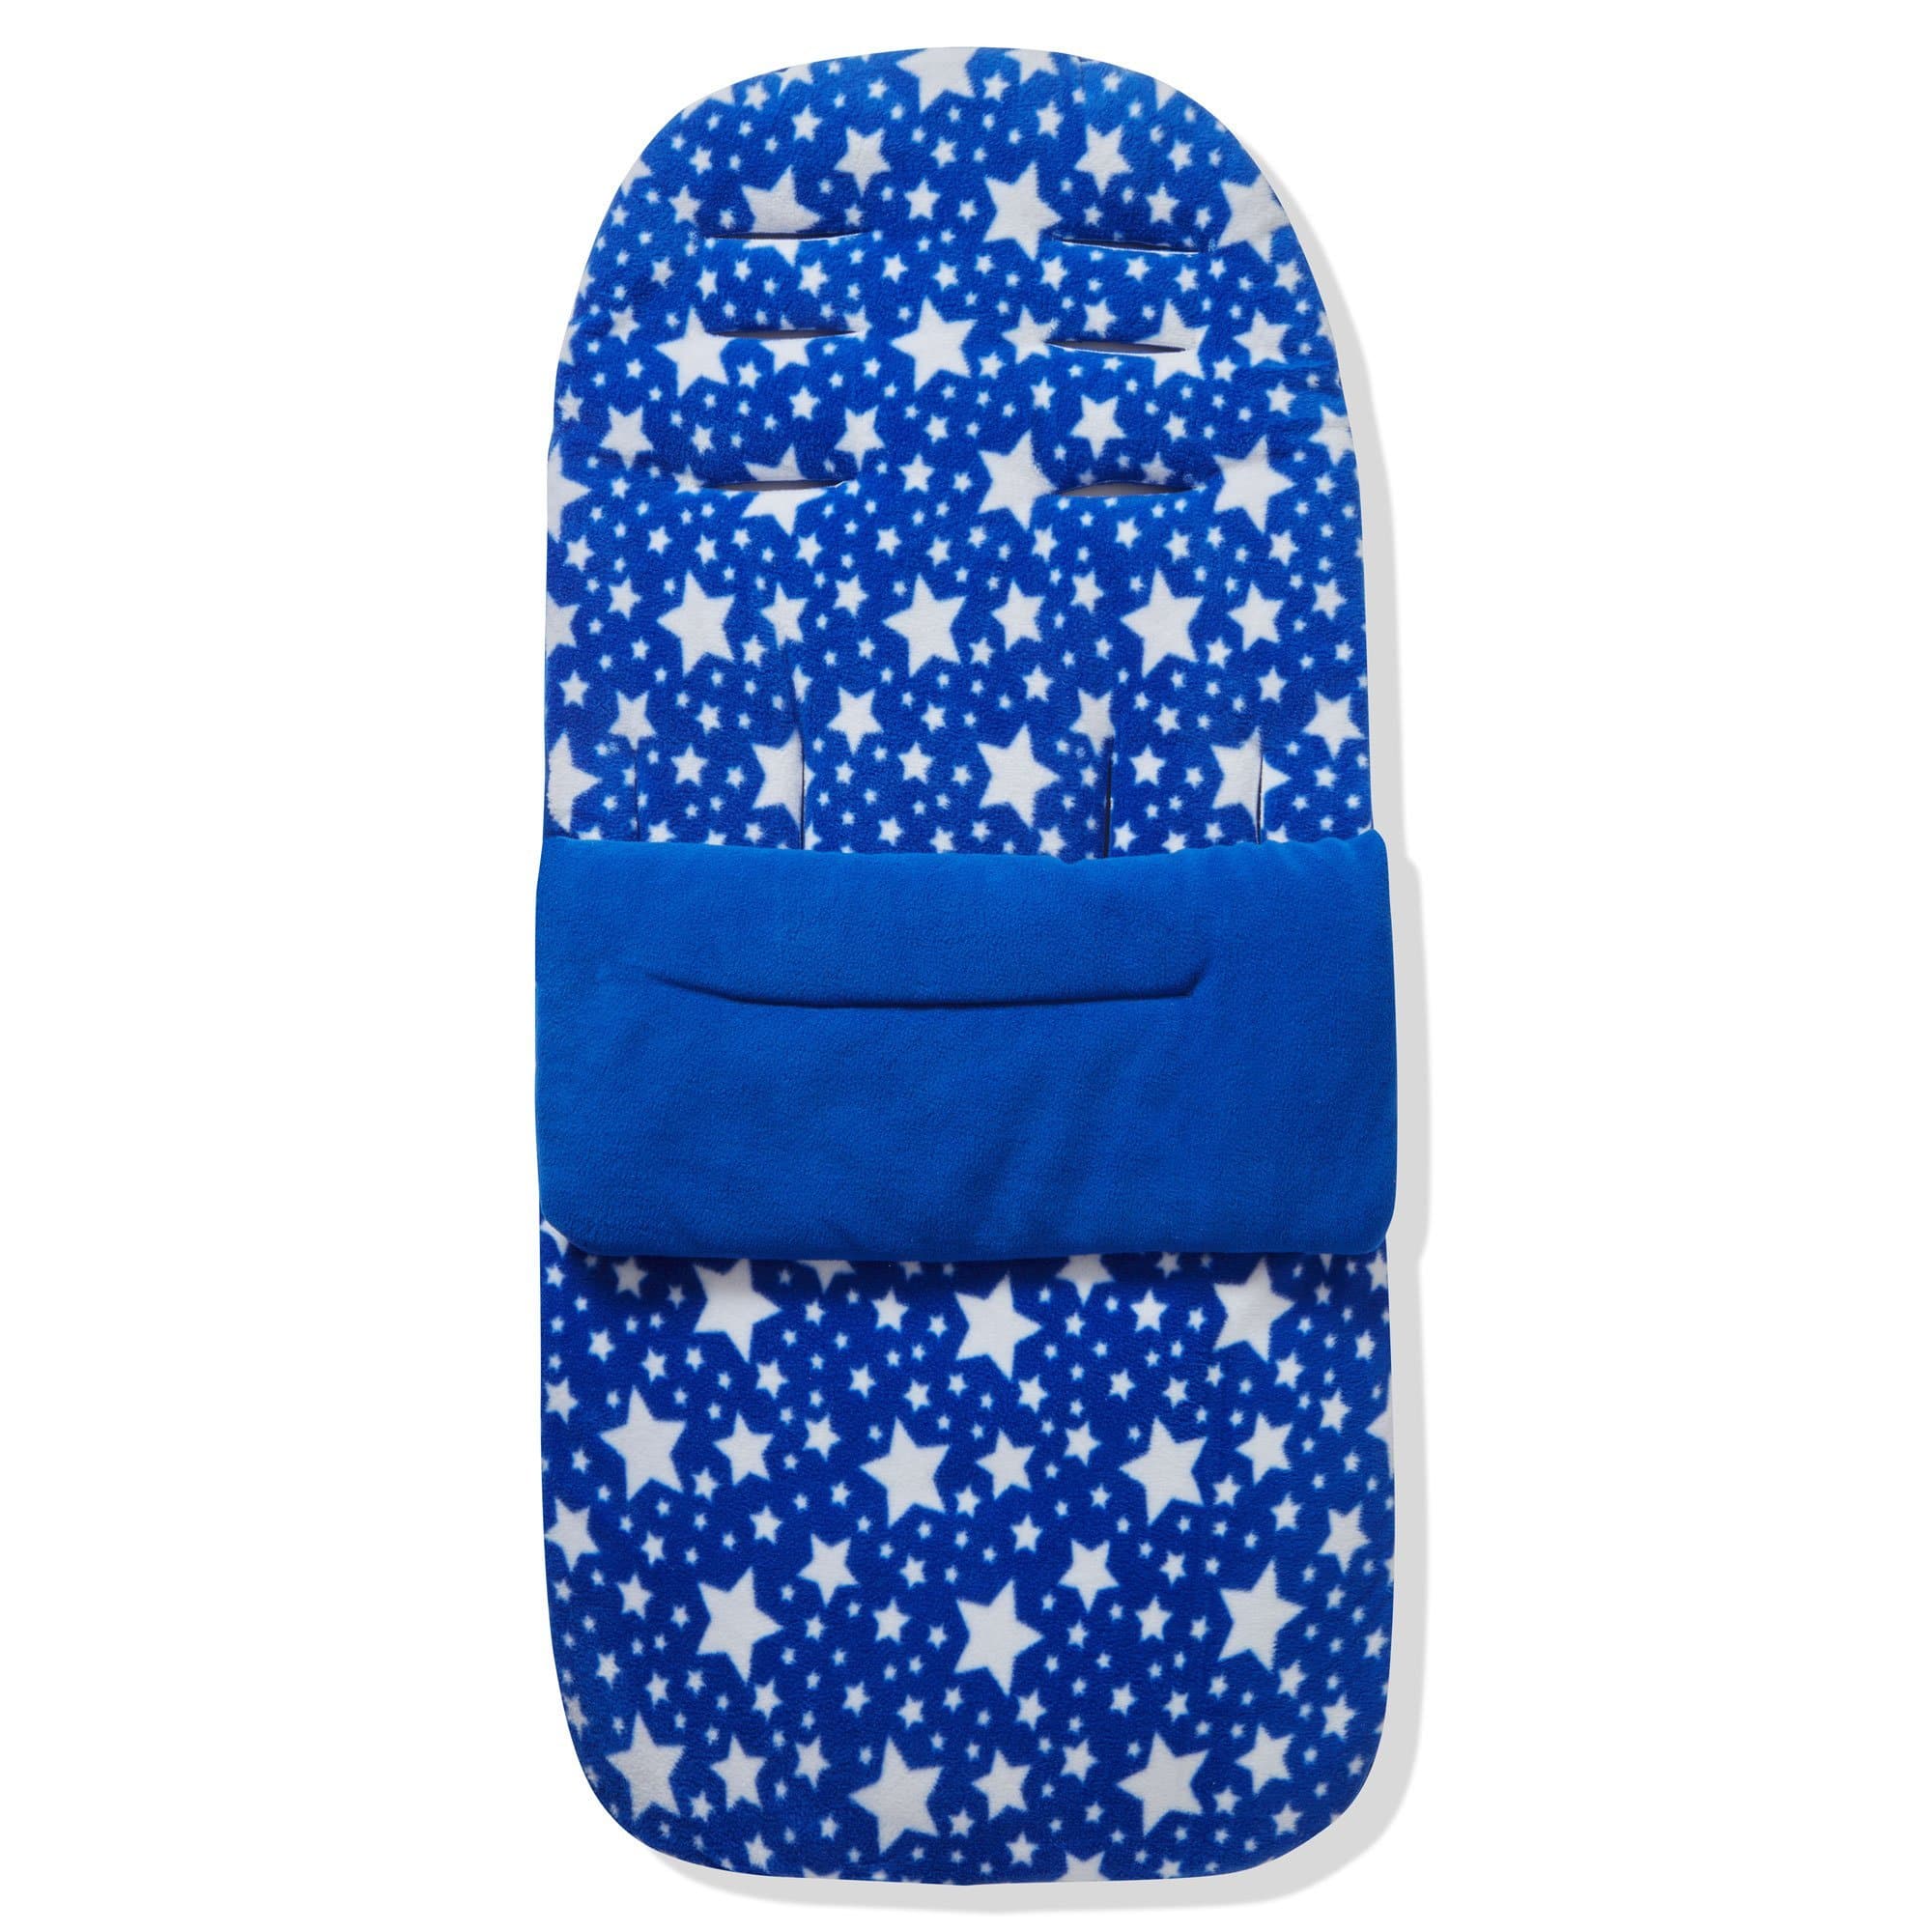 Fleece Footmuff / Cosy Toes Compatible with Mima - Blue Star / Fits All Models | For Your Little One